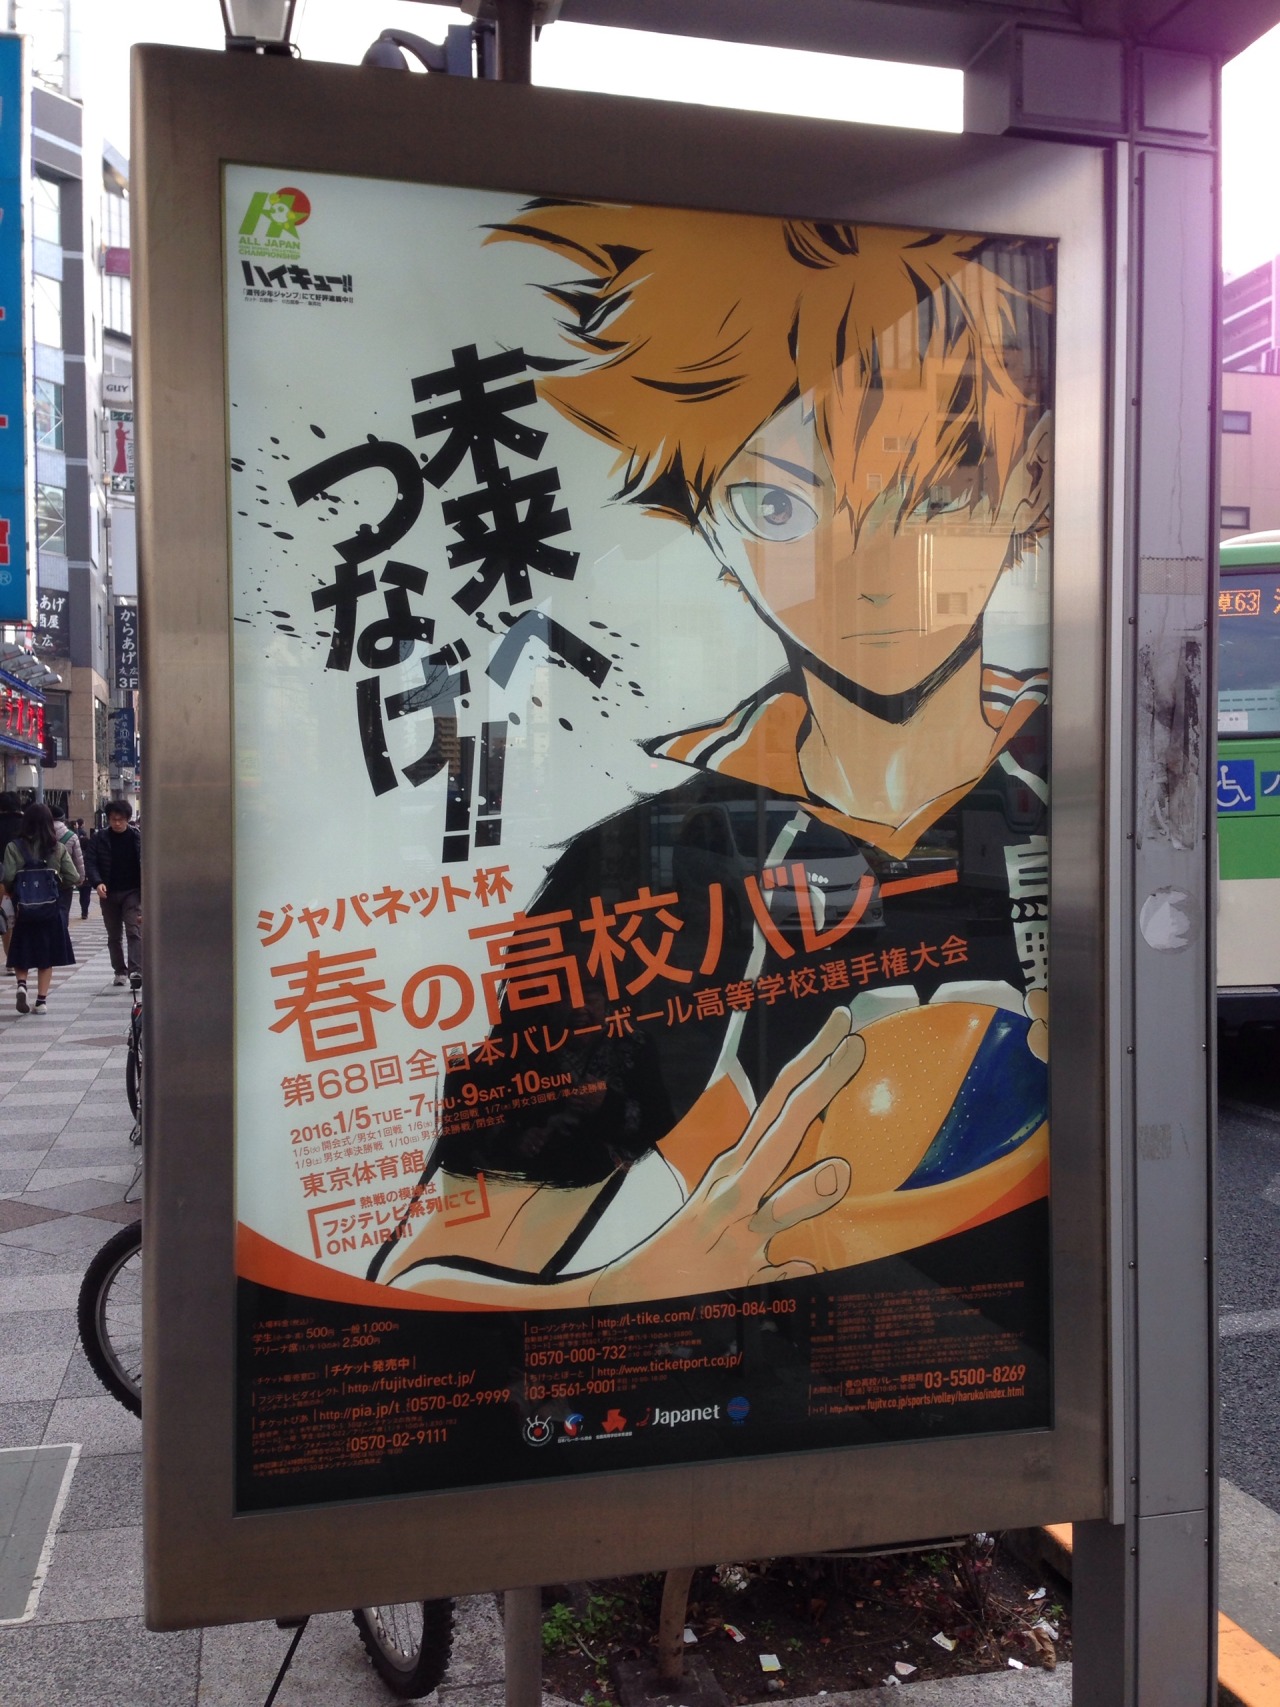 Haikyuu Hypes Anime Finale Event With New Poster